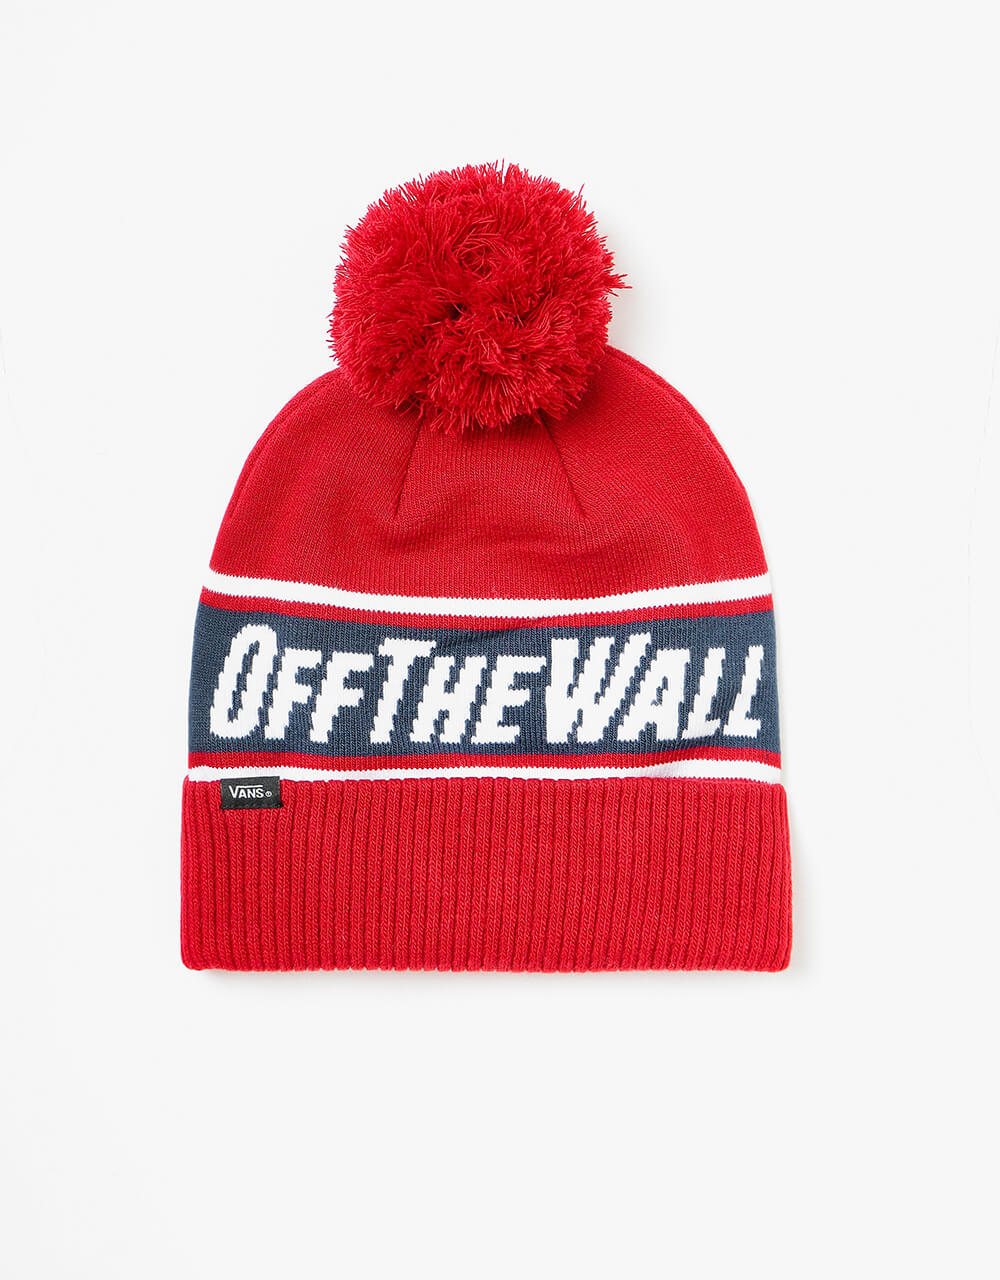 vans off the wall pom beanie